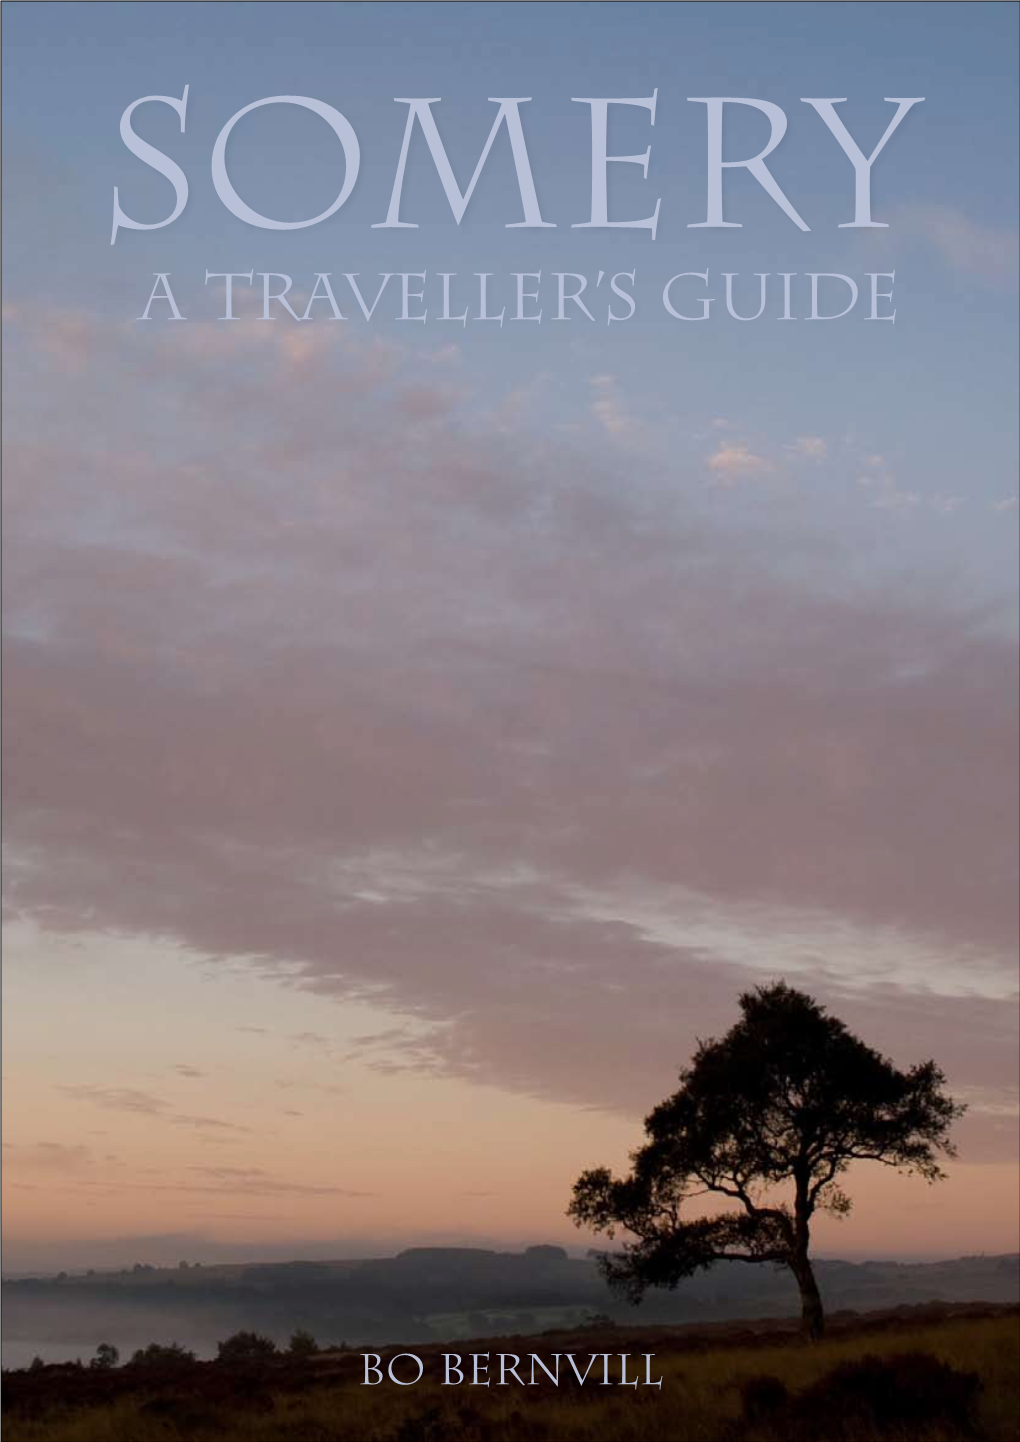 A TRAVELLER's GUIDE